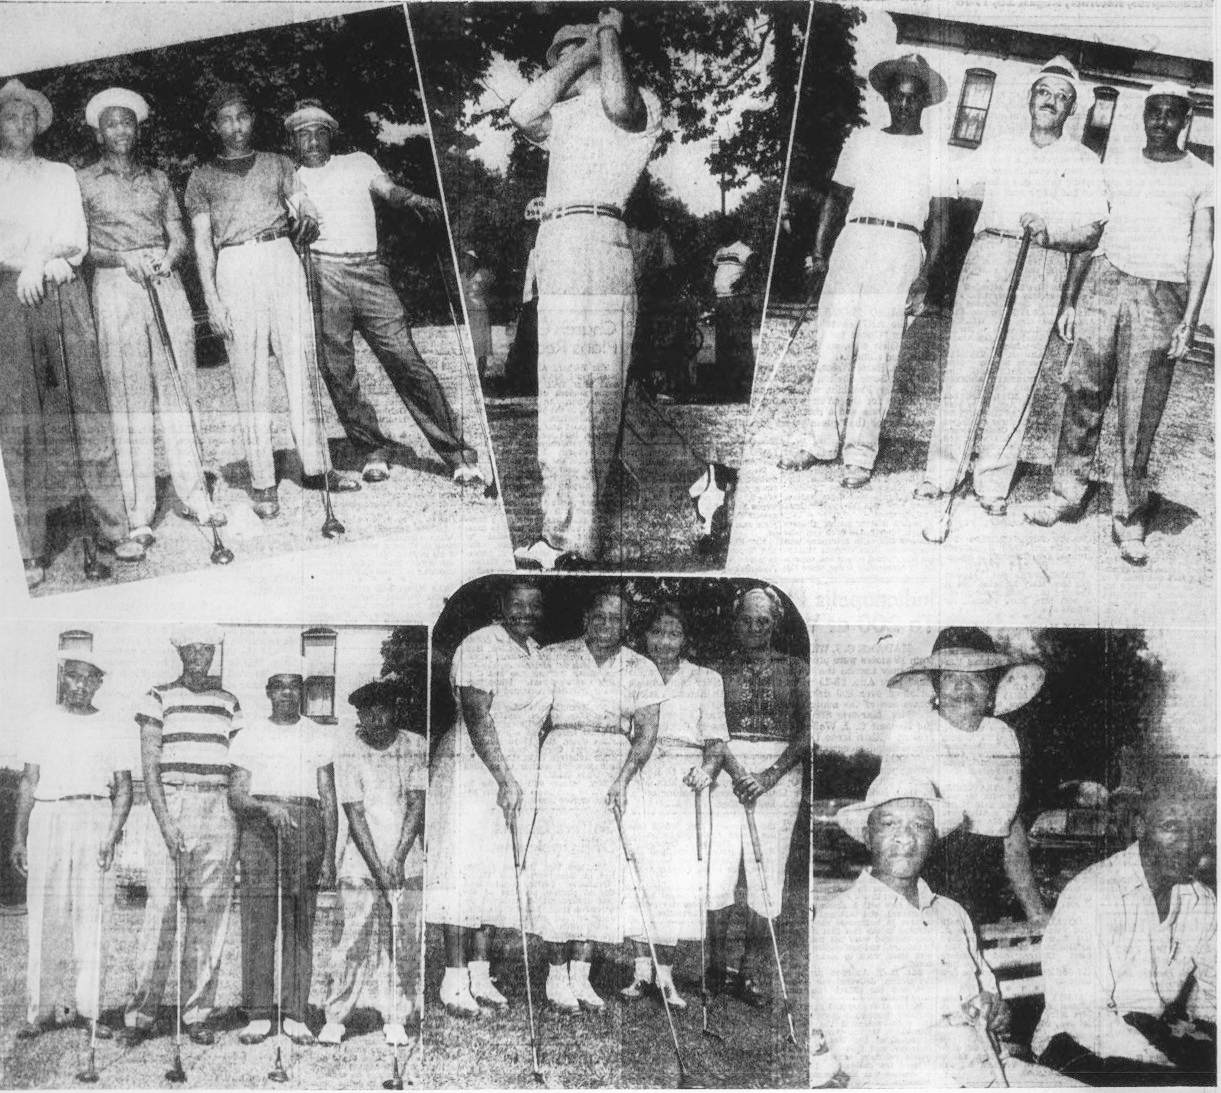 A collage of six photos showing men and women golfers.